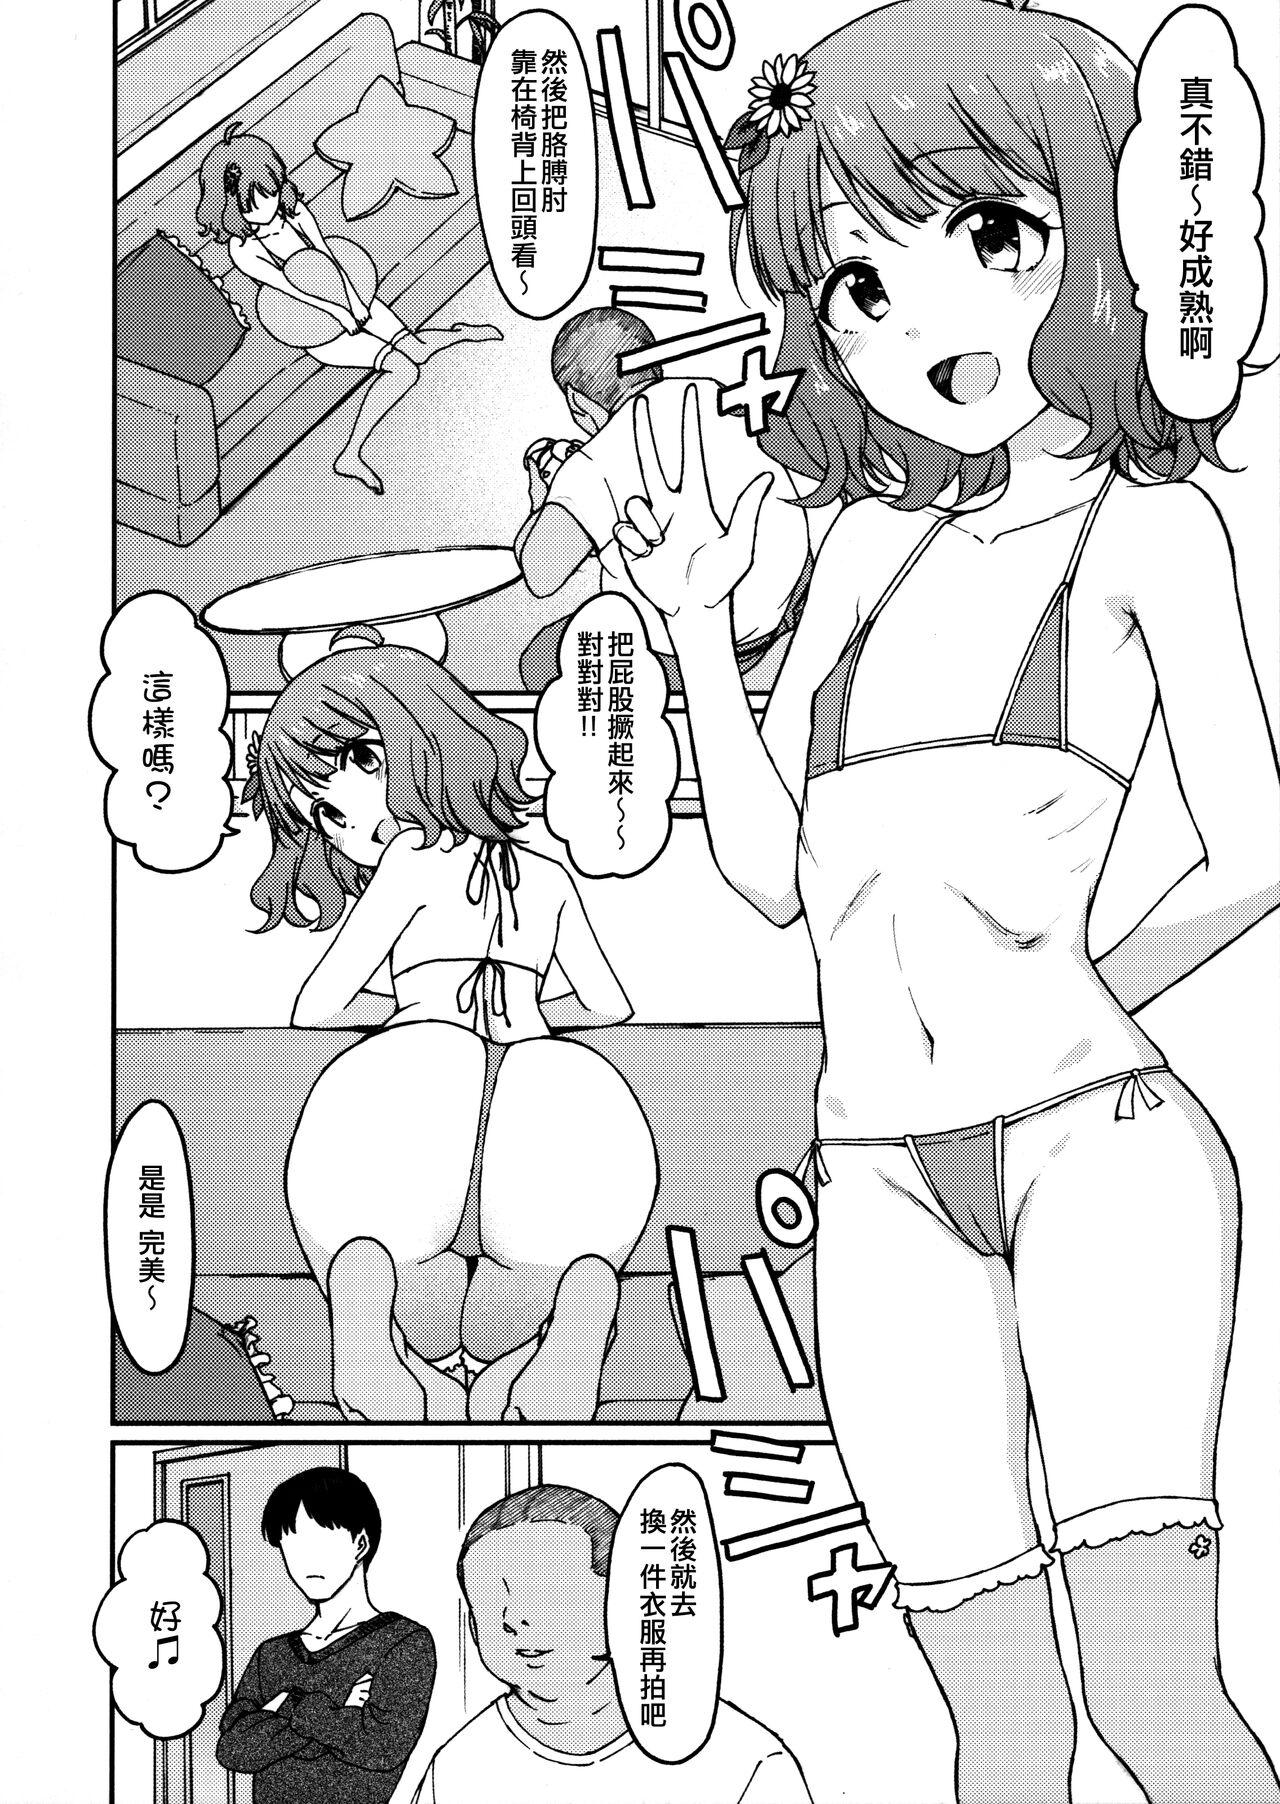 Female Candy Wrapper - The idolmaster Small - Page 5